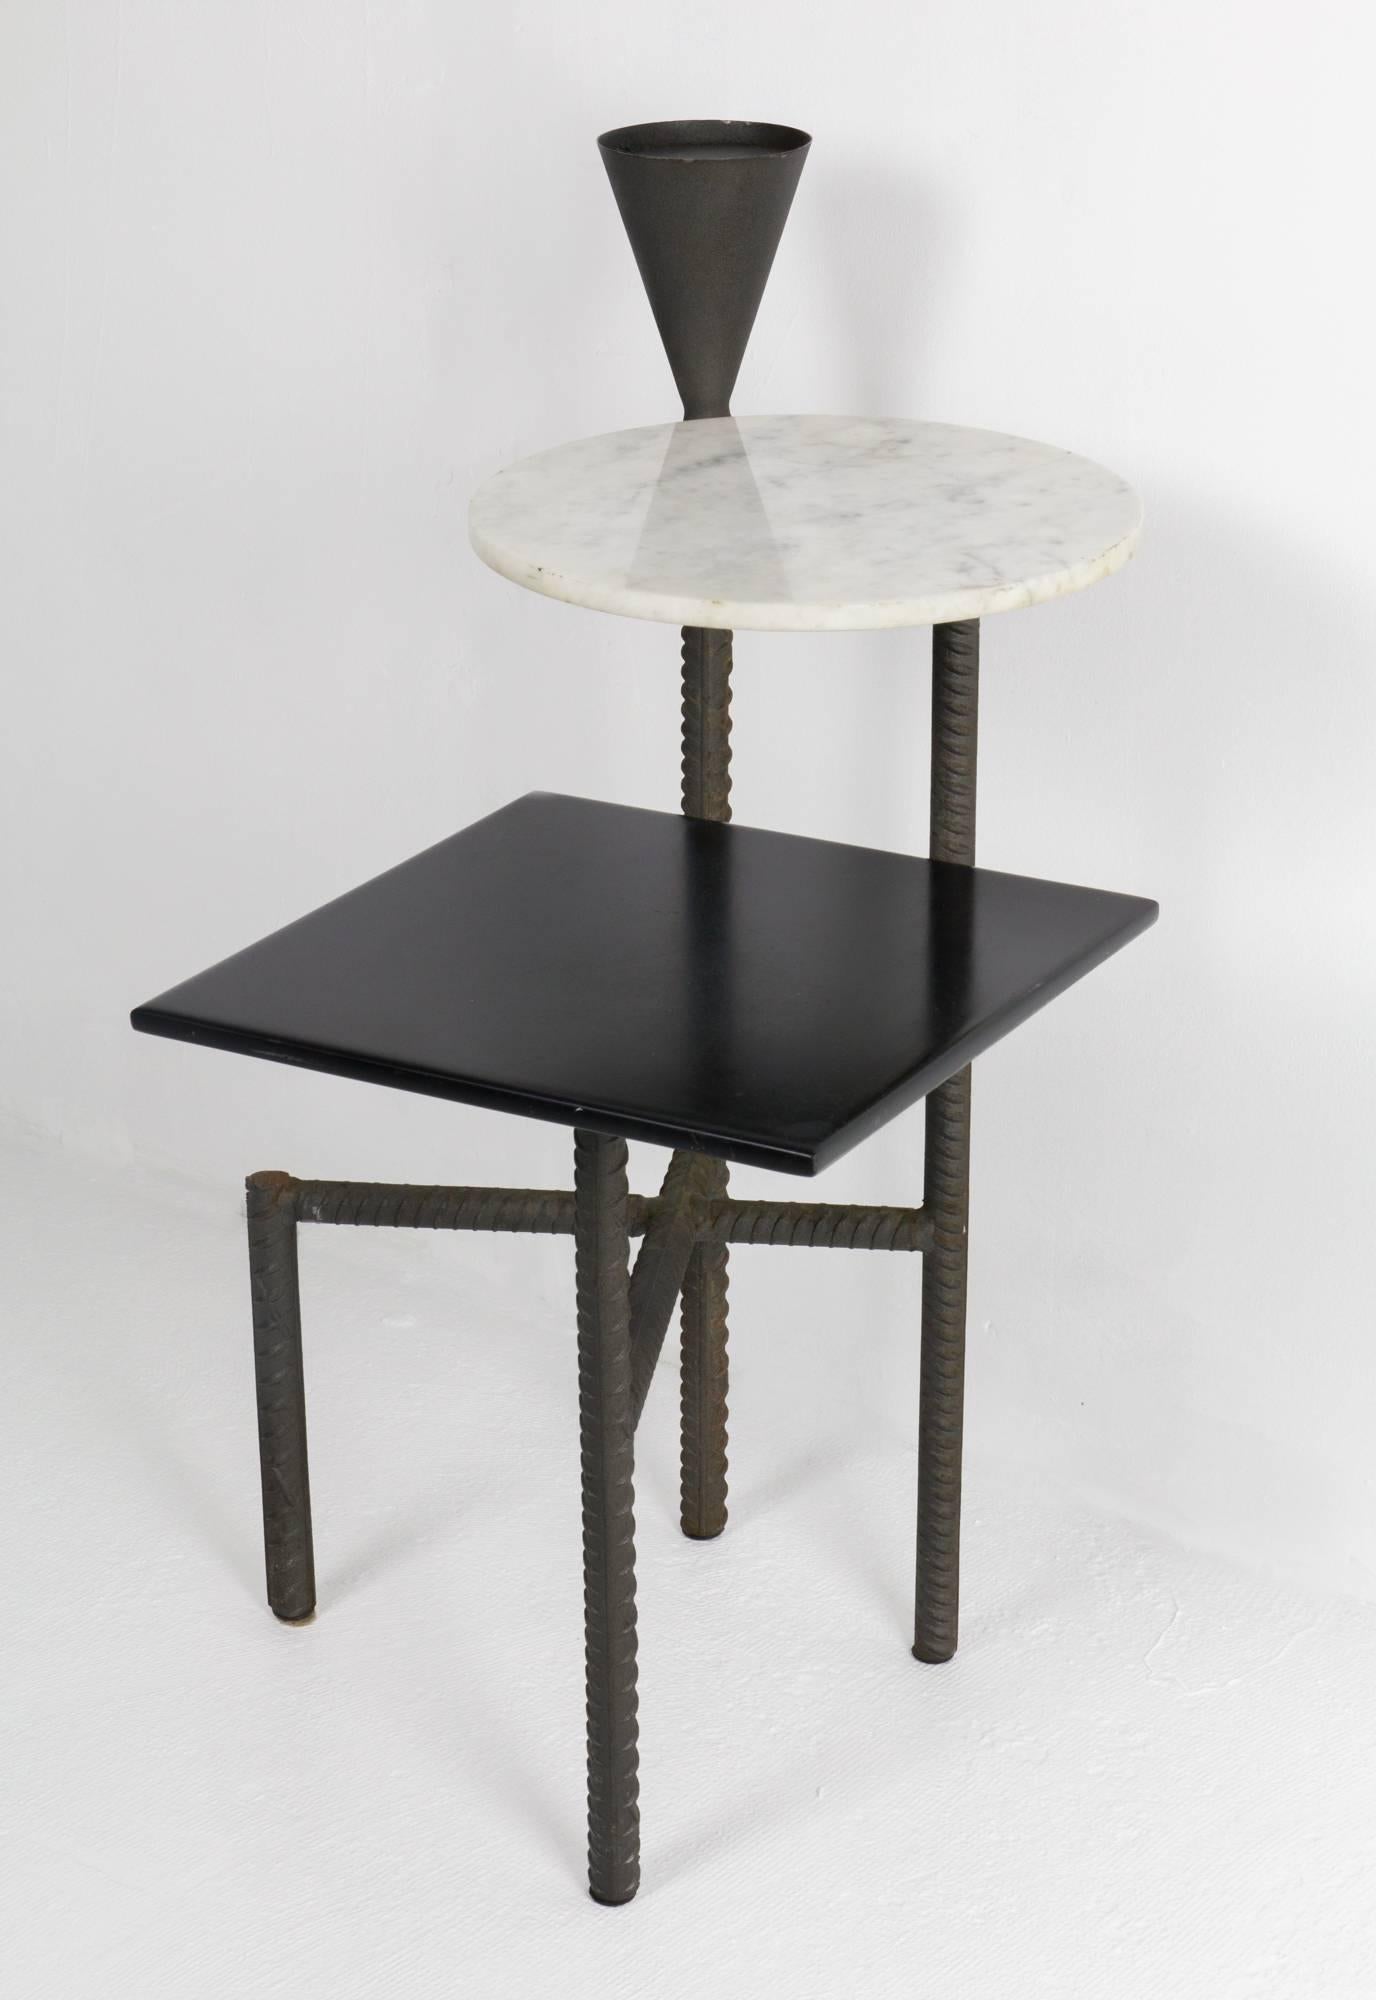 Limited-production Philippe Starck bedside table custom built for his Paramount Hotel interior having tiered Carrara marble surfaces, conical steel drink stand and rebar frame.